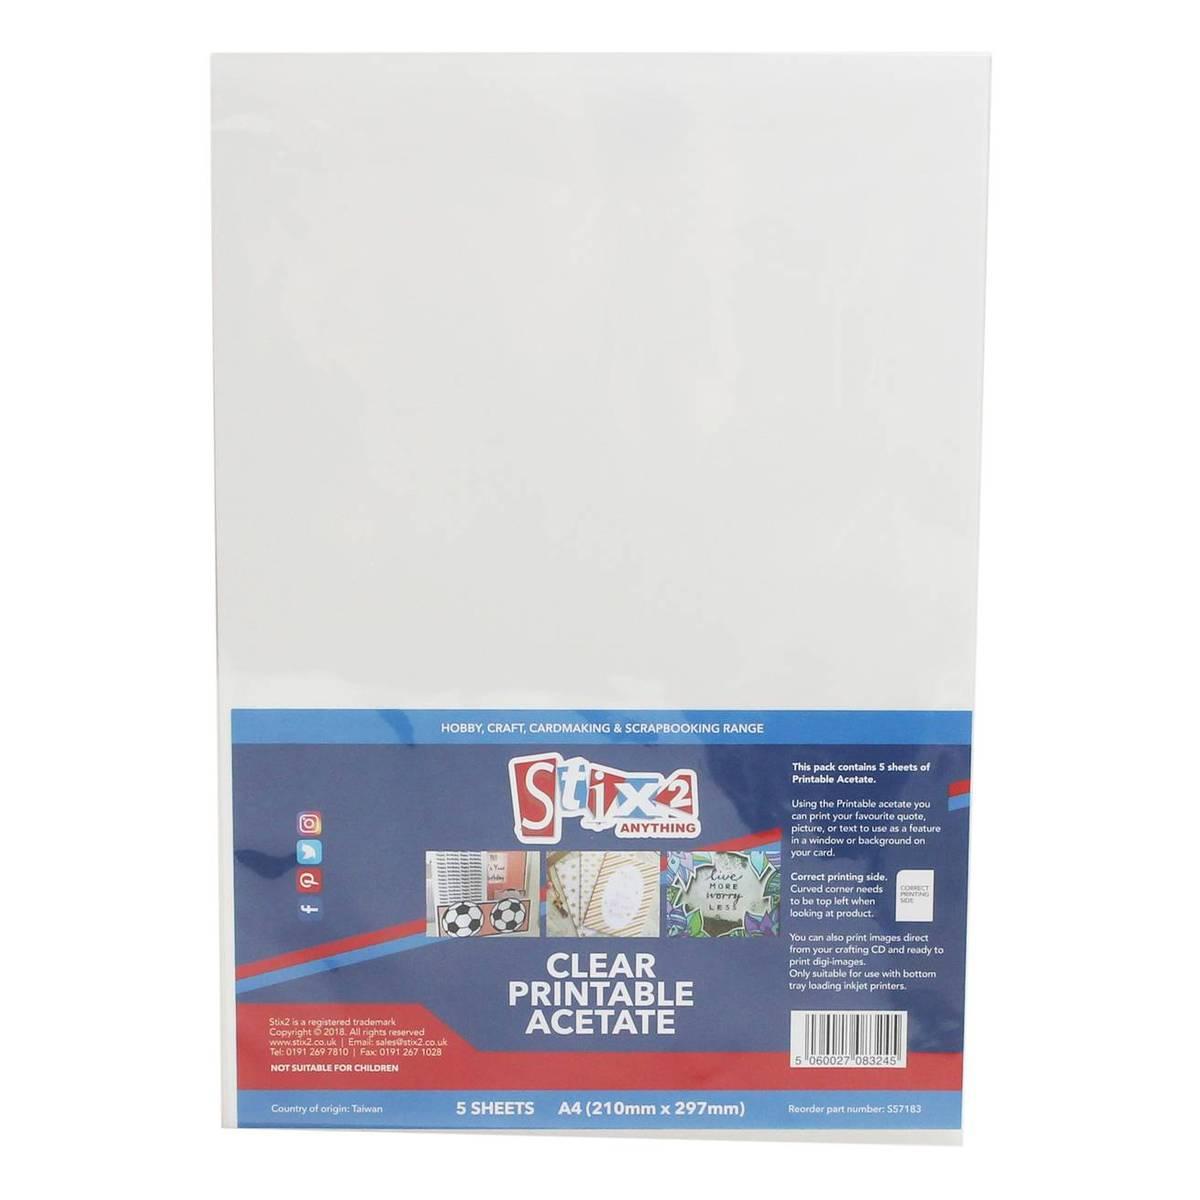 stix-2-anything-clear-printable-acetate-sheets-a4-5-pack-hobbycraft